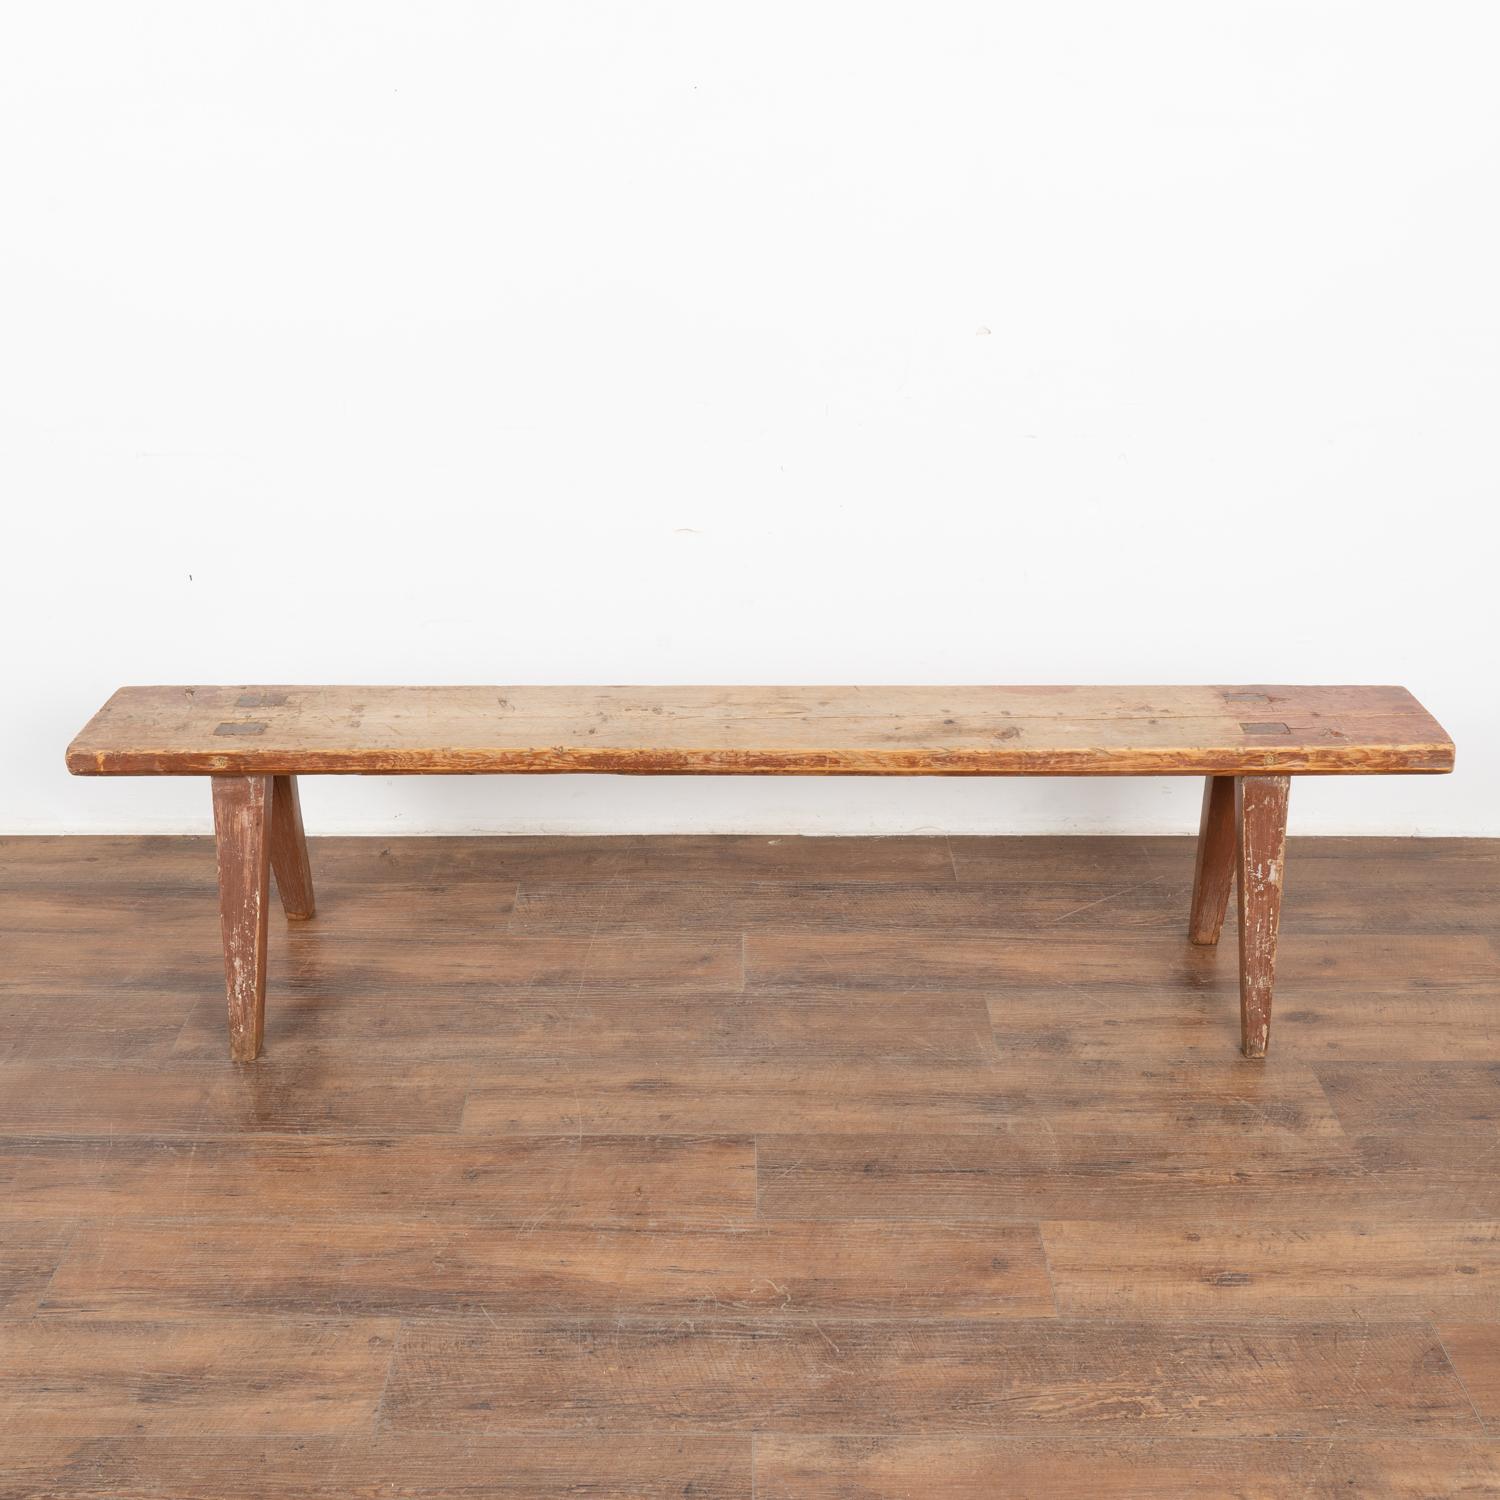 Country Long Painted Pine Bench from Sweden, circa 1890 For Sale